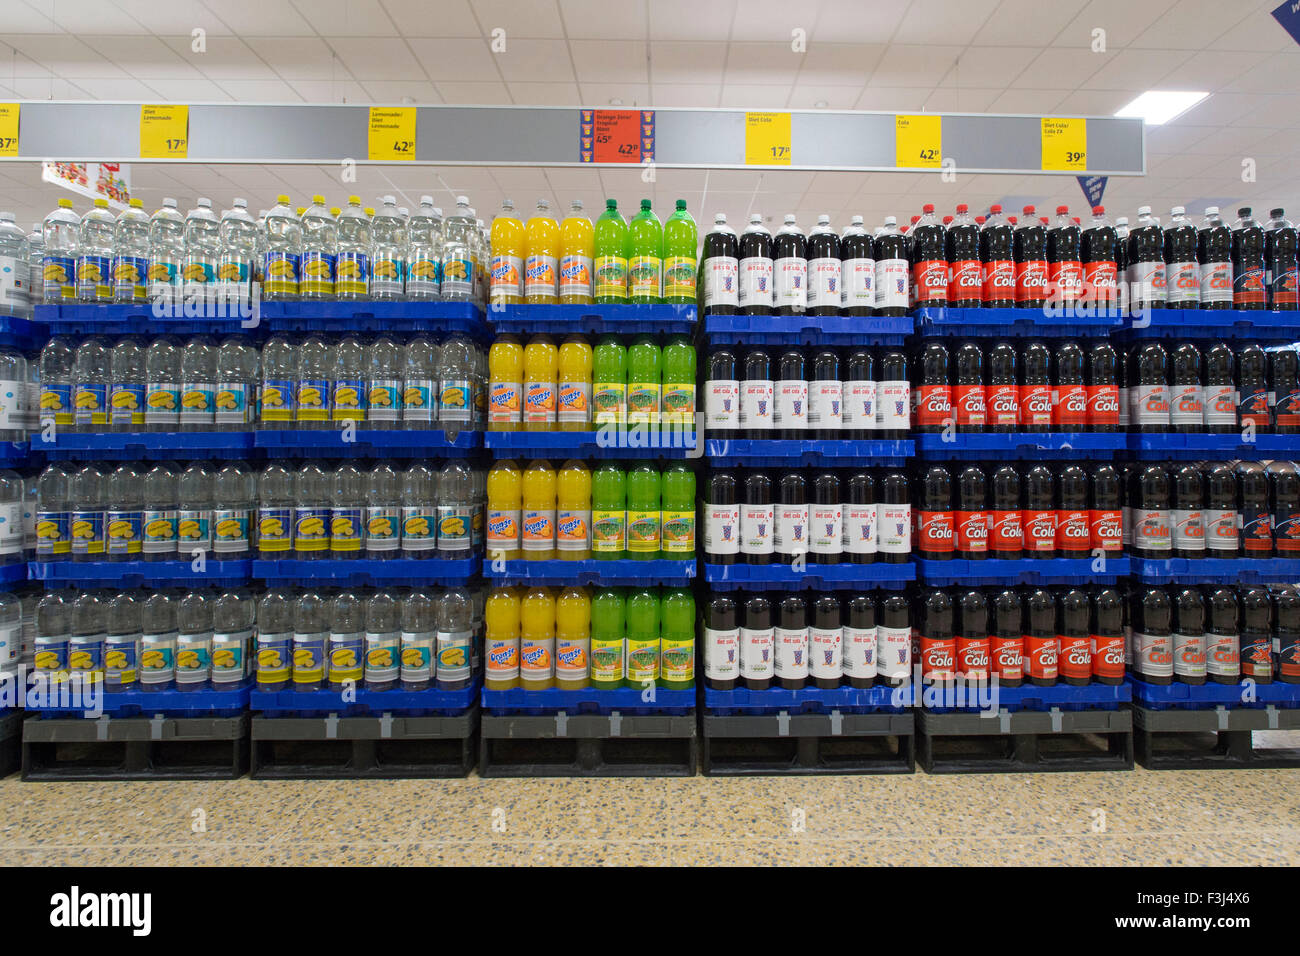 Fizzy drinks on sale in a supermarket. Fizzy drinks cause tooth decay and diabetes. Stock Photo